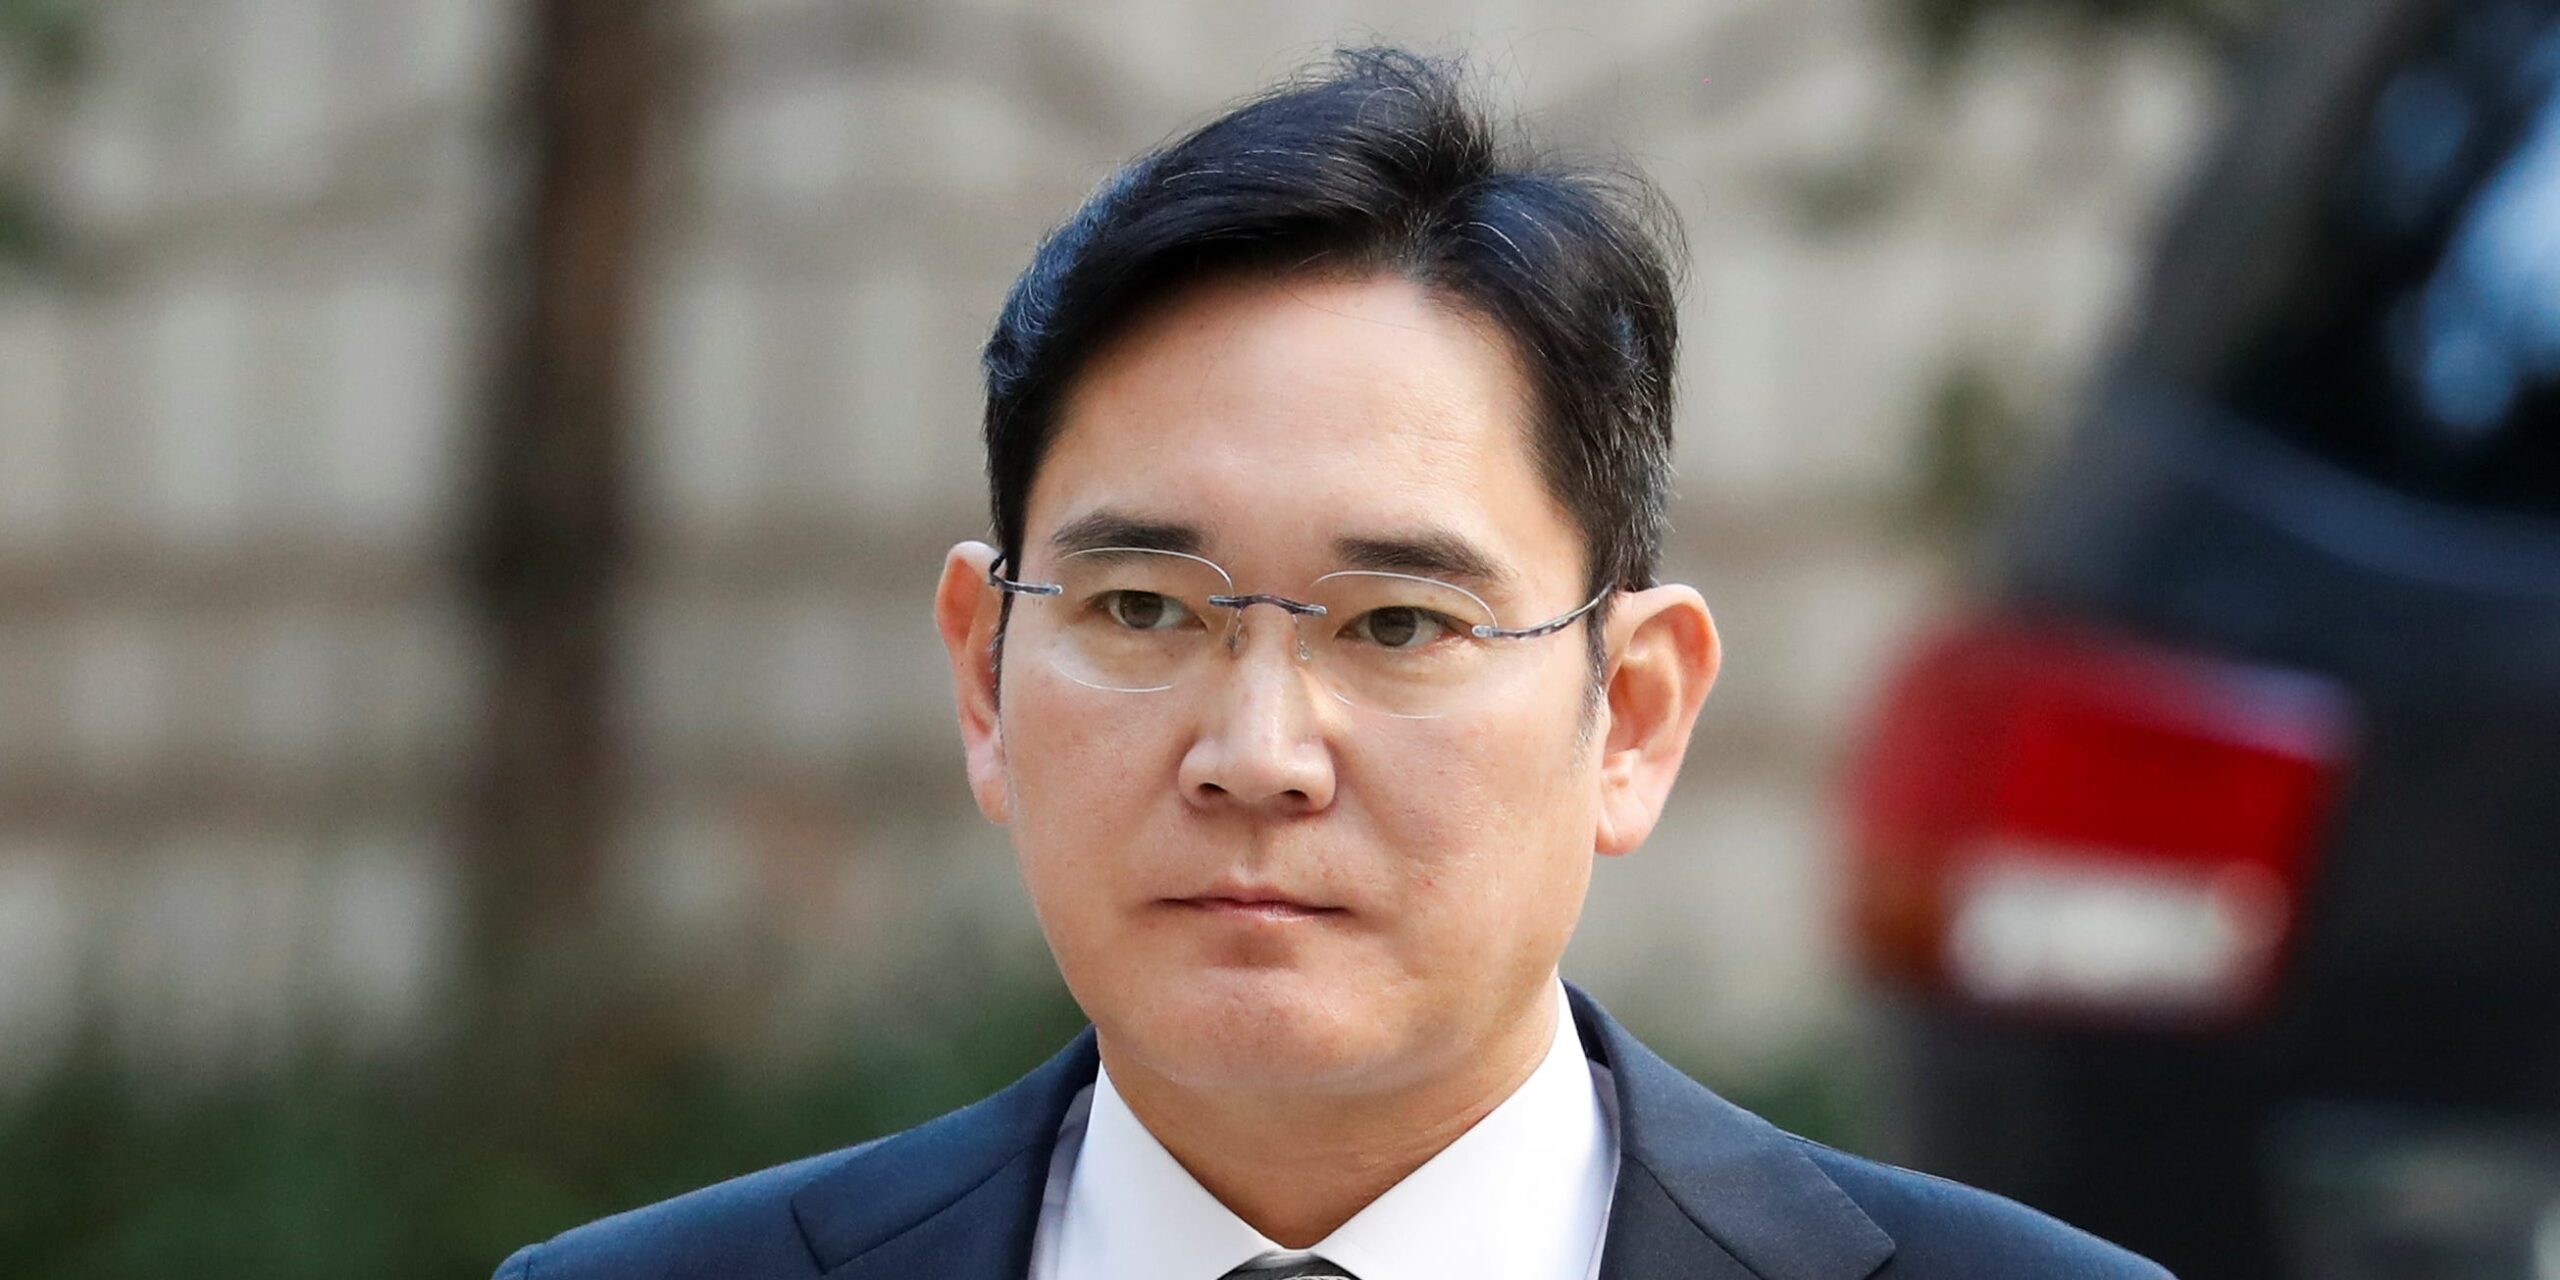 Samsung heir Jay Y. Lee ordered back to prison for 2 and a half years over bribery charges